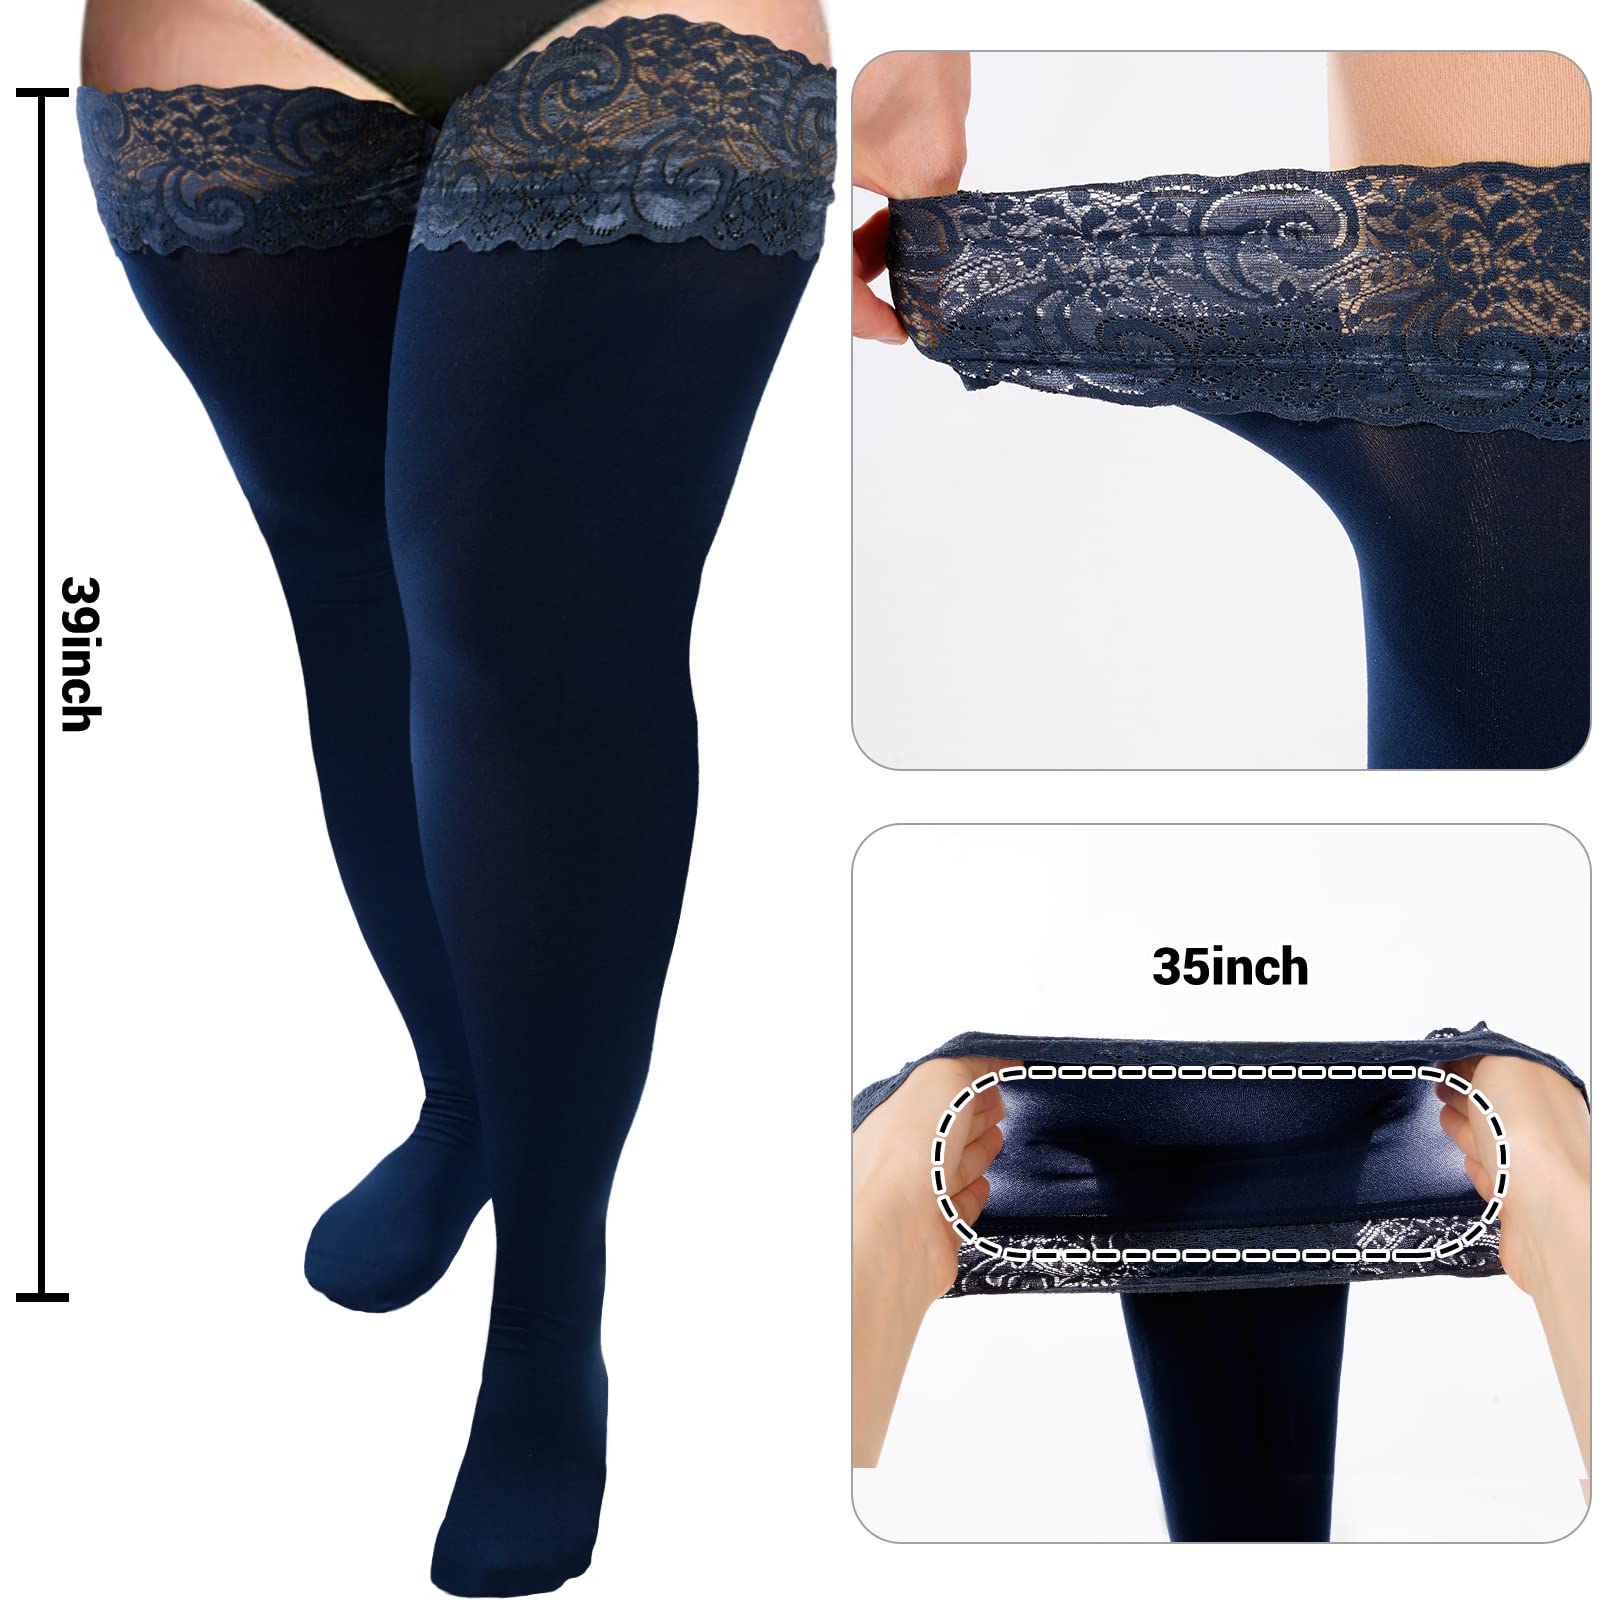 55D Semi Sheer Silicone Lace Stay Up Thigh Highs Pantyhose-Navy Blue - Moon Wood